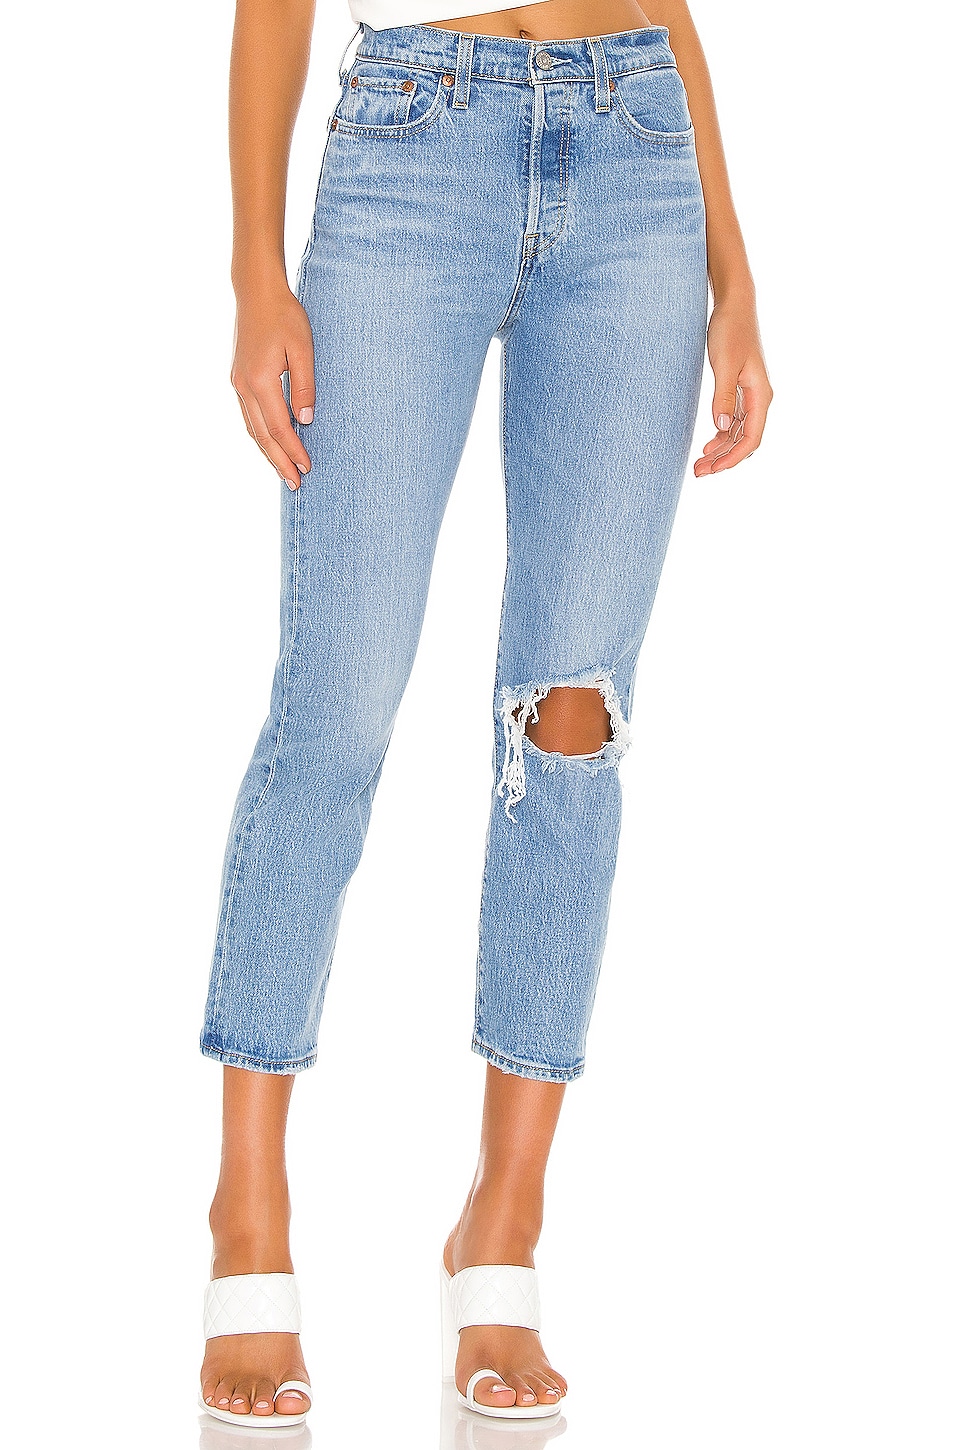 LEVI'S Wedgie Straight in Tango Fray | REVOLVE